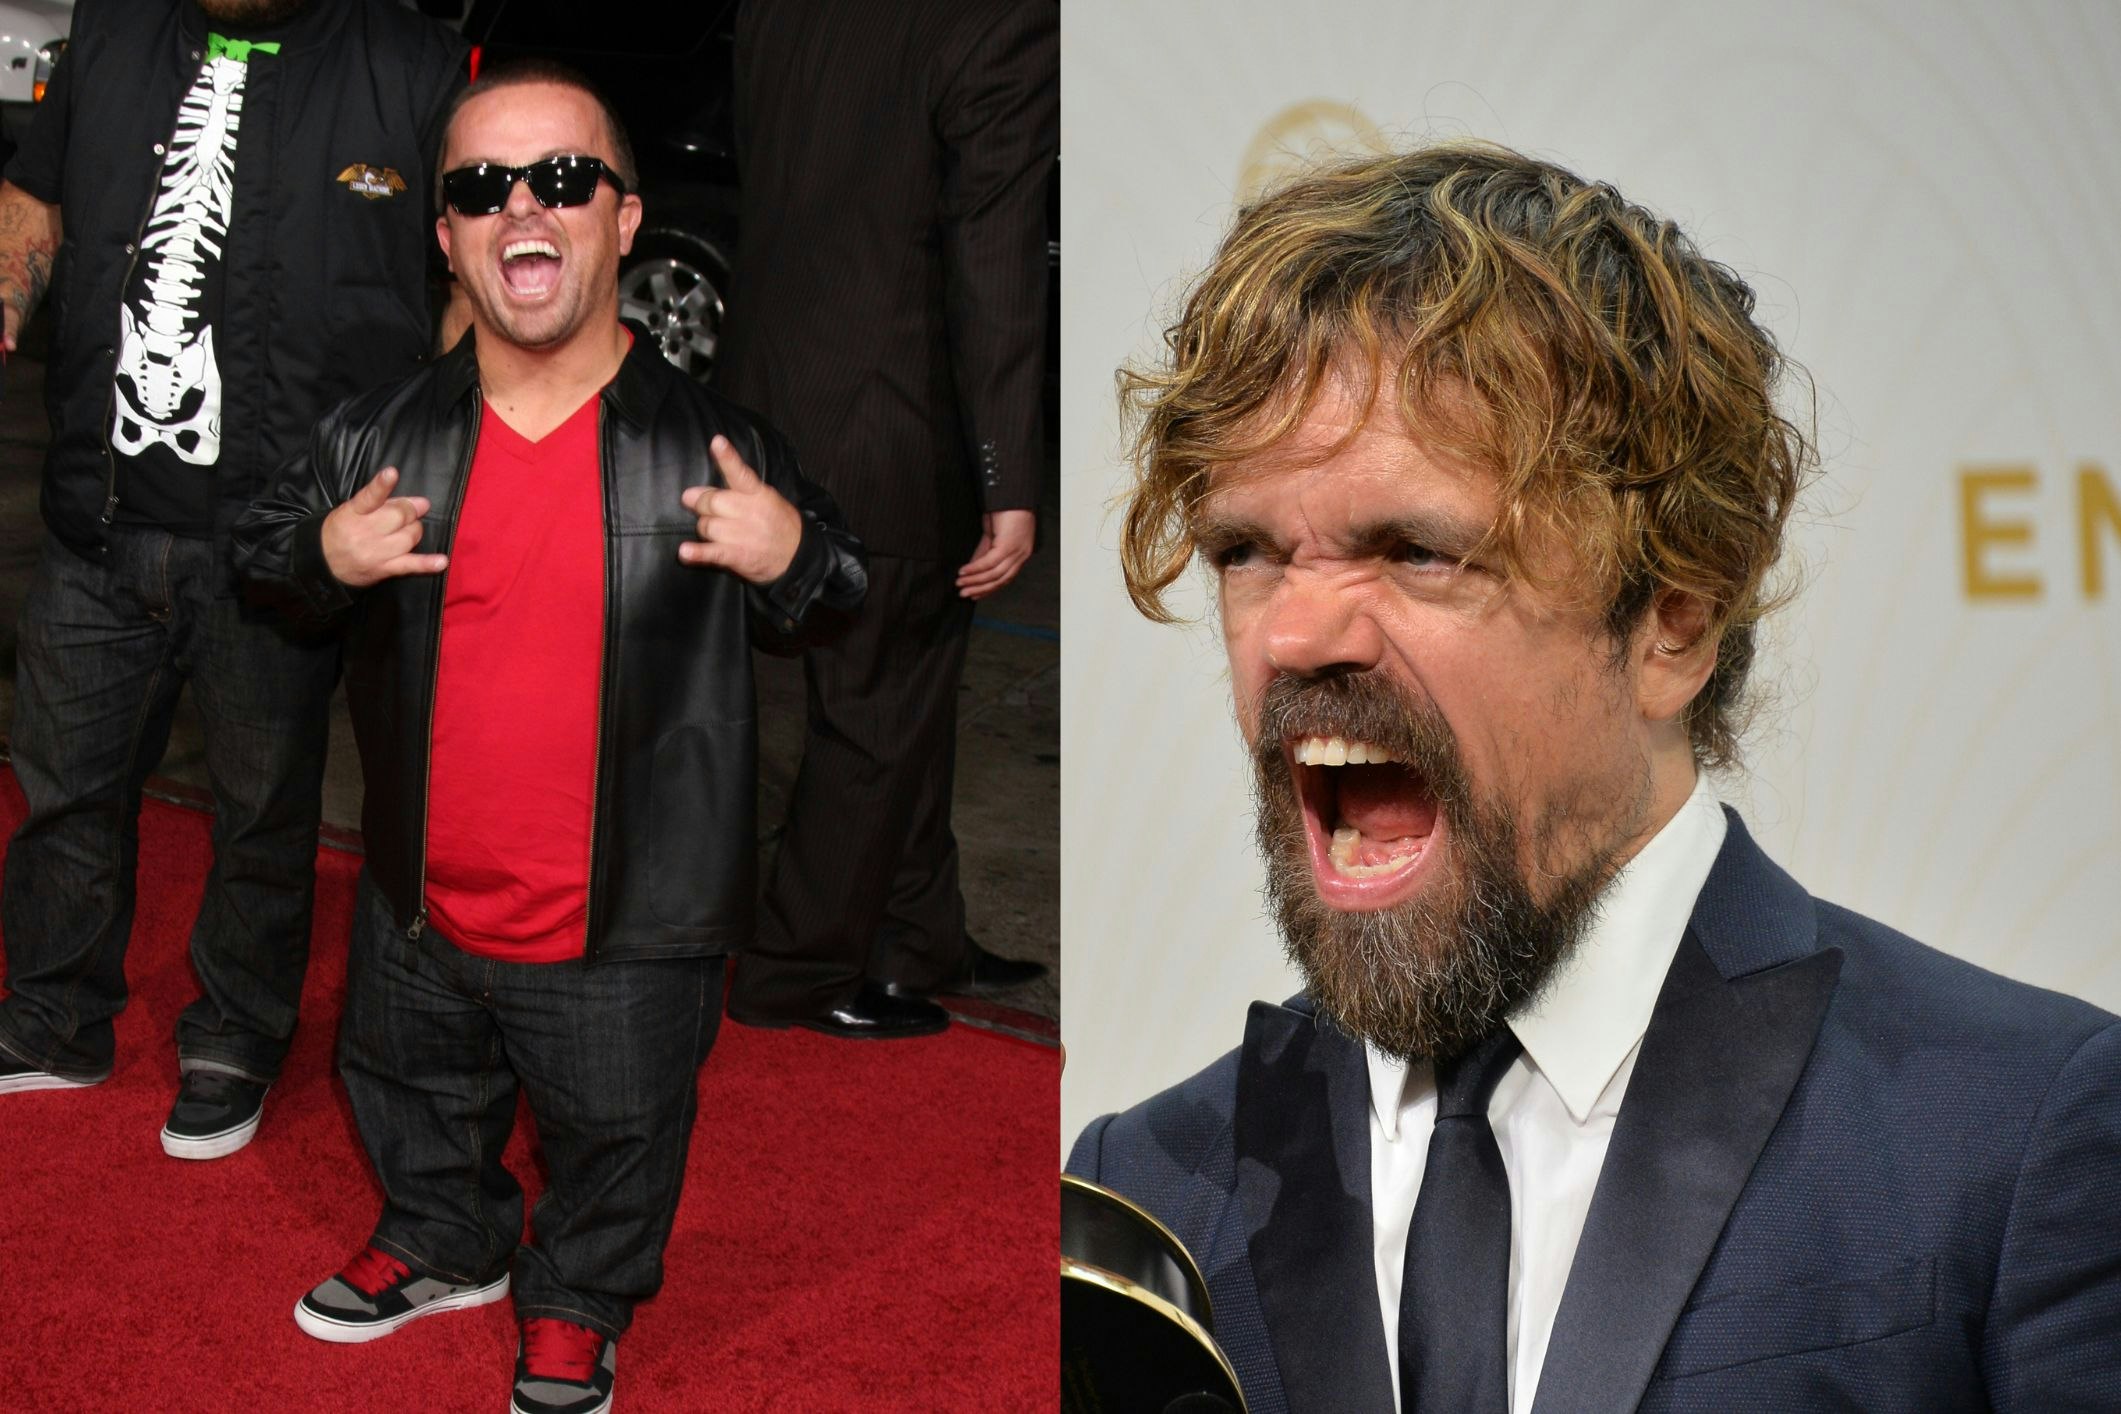 Jackass star, Jason ‘Wee Man’ Acuña [left, credit: Kathy Hutchins] and Game of Thrones actor, Peter Dinklage, are among the film industry icons calling for authentic representation in media. [Source: Shutterstock]
